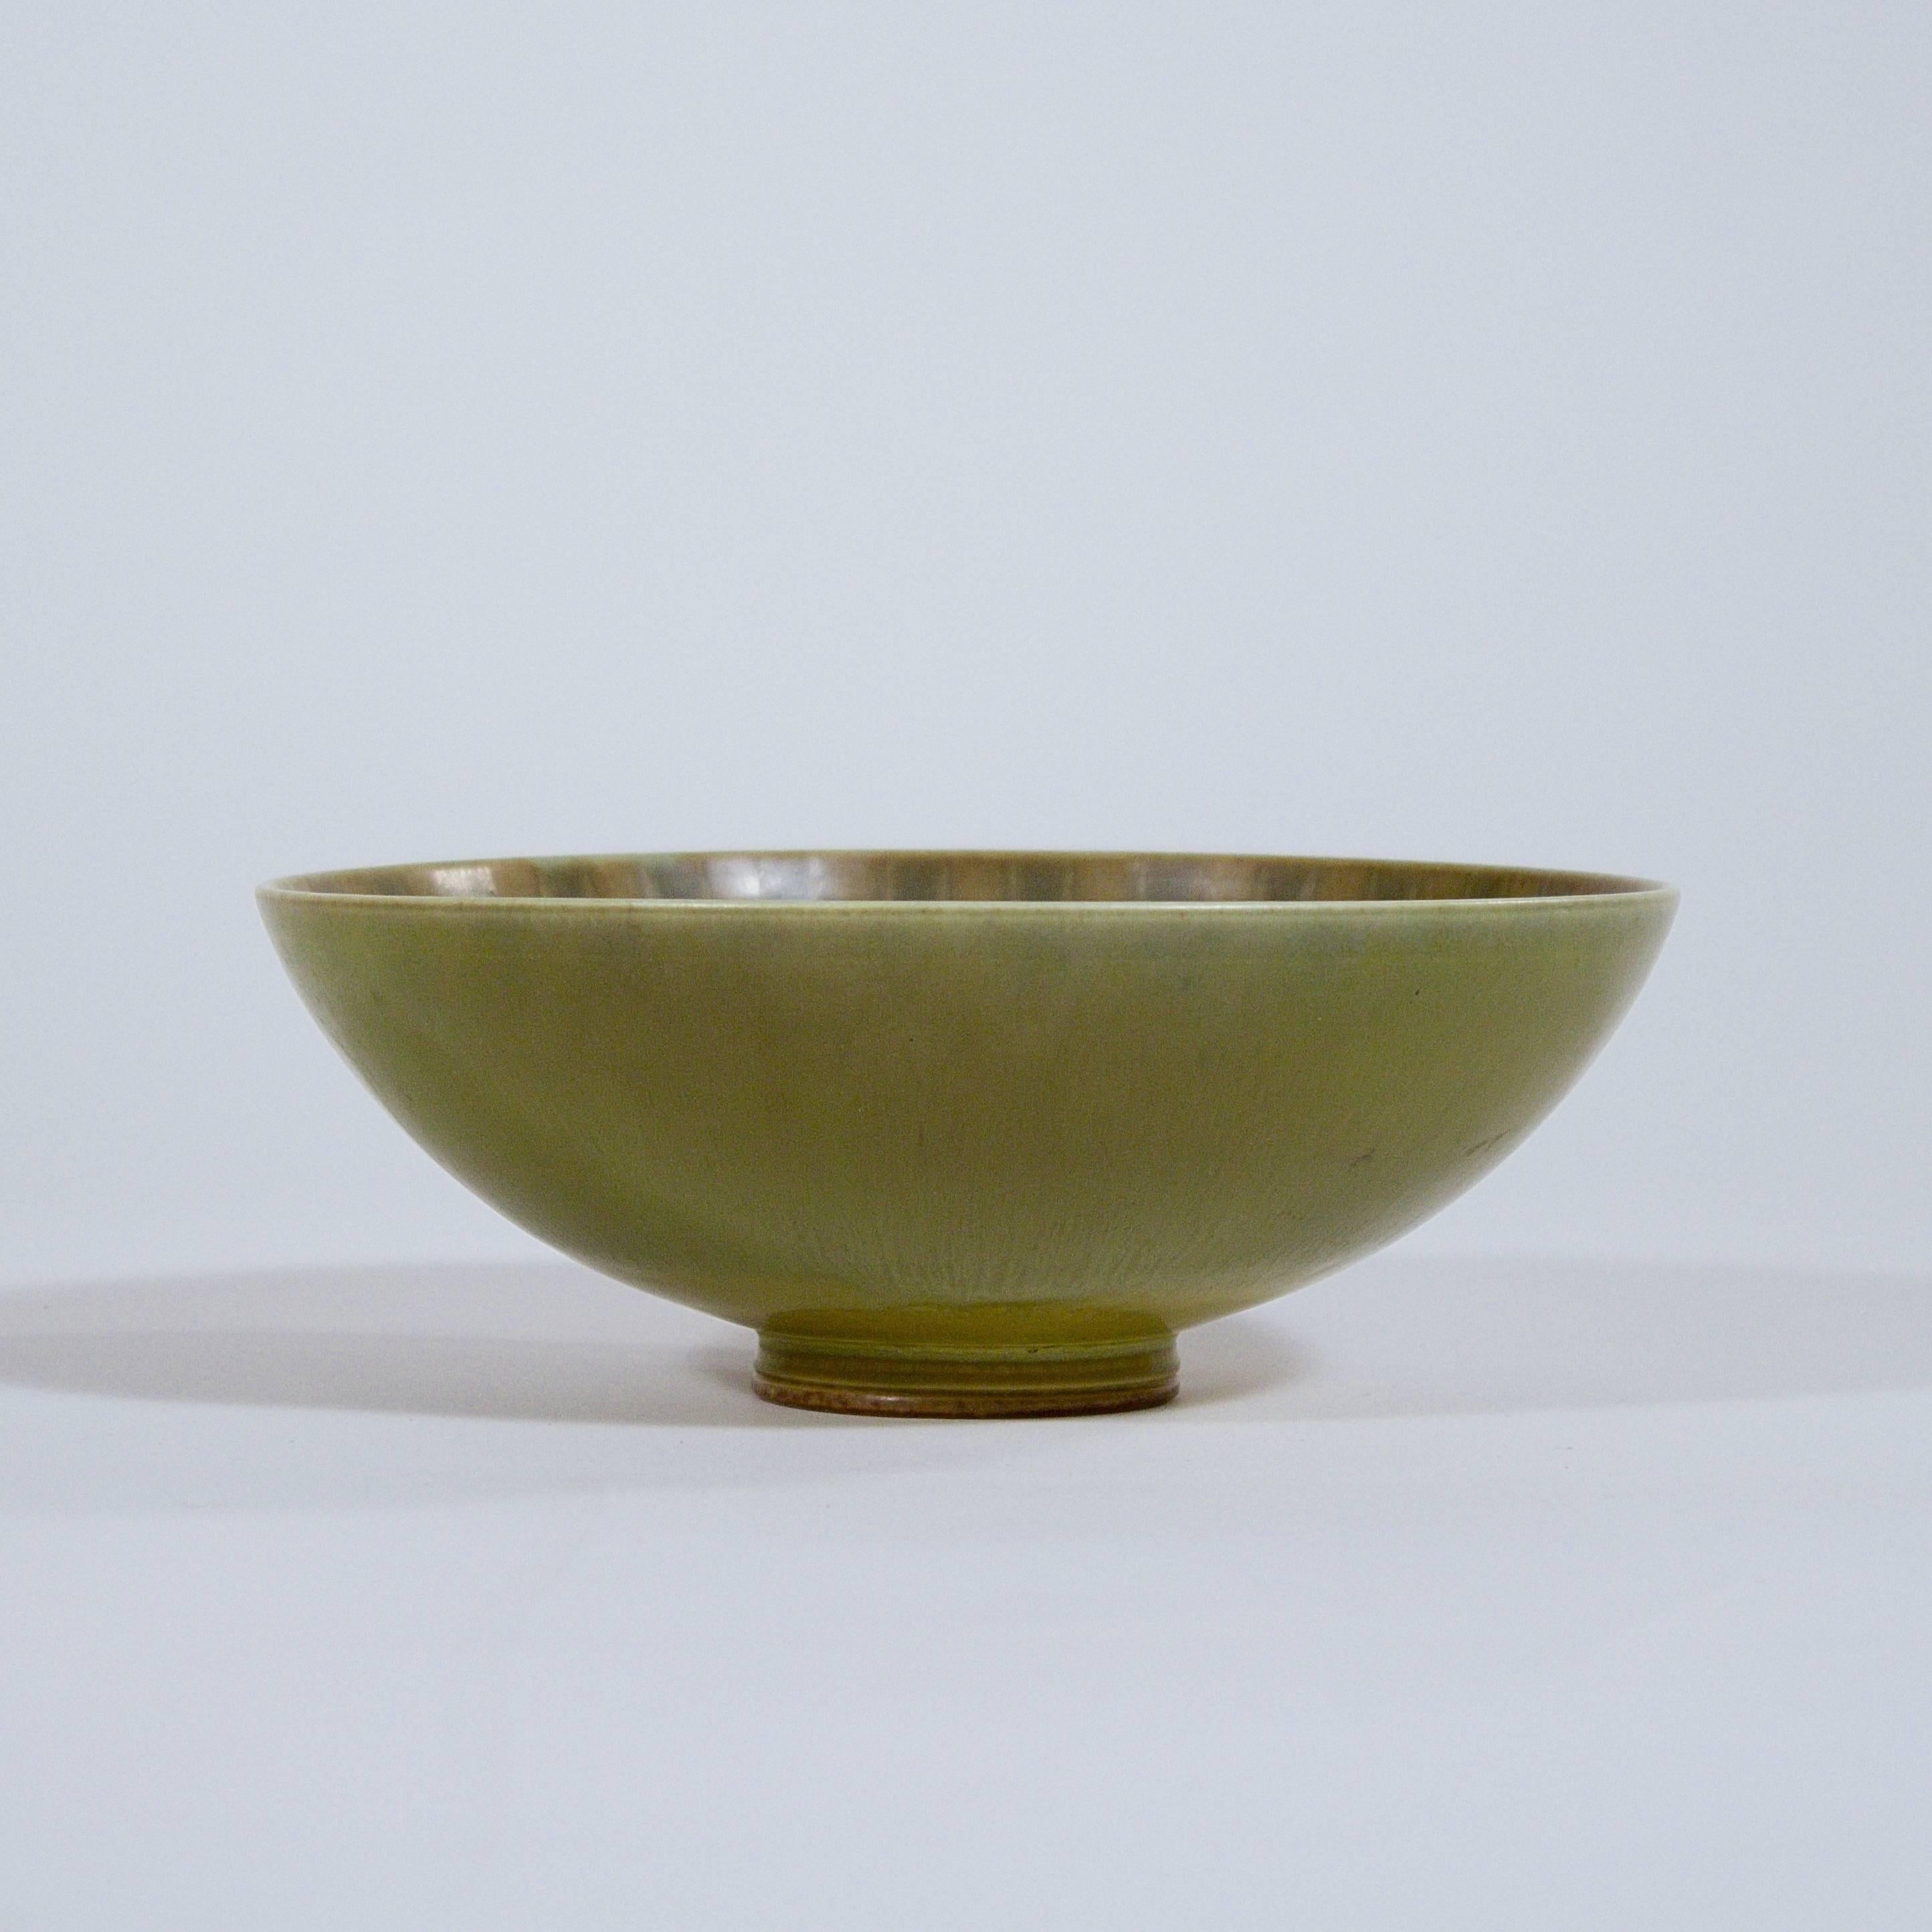 A circular stoneware footed bowl with a fine hare's fur green glaze by Berndt Friberg (1899-1981).

Signed to the base.

Designed for Gustavsberg, Sweden, circa 1950s.